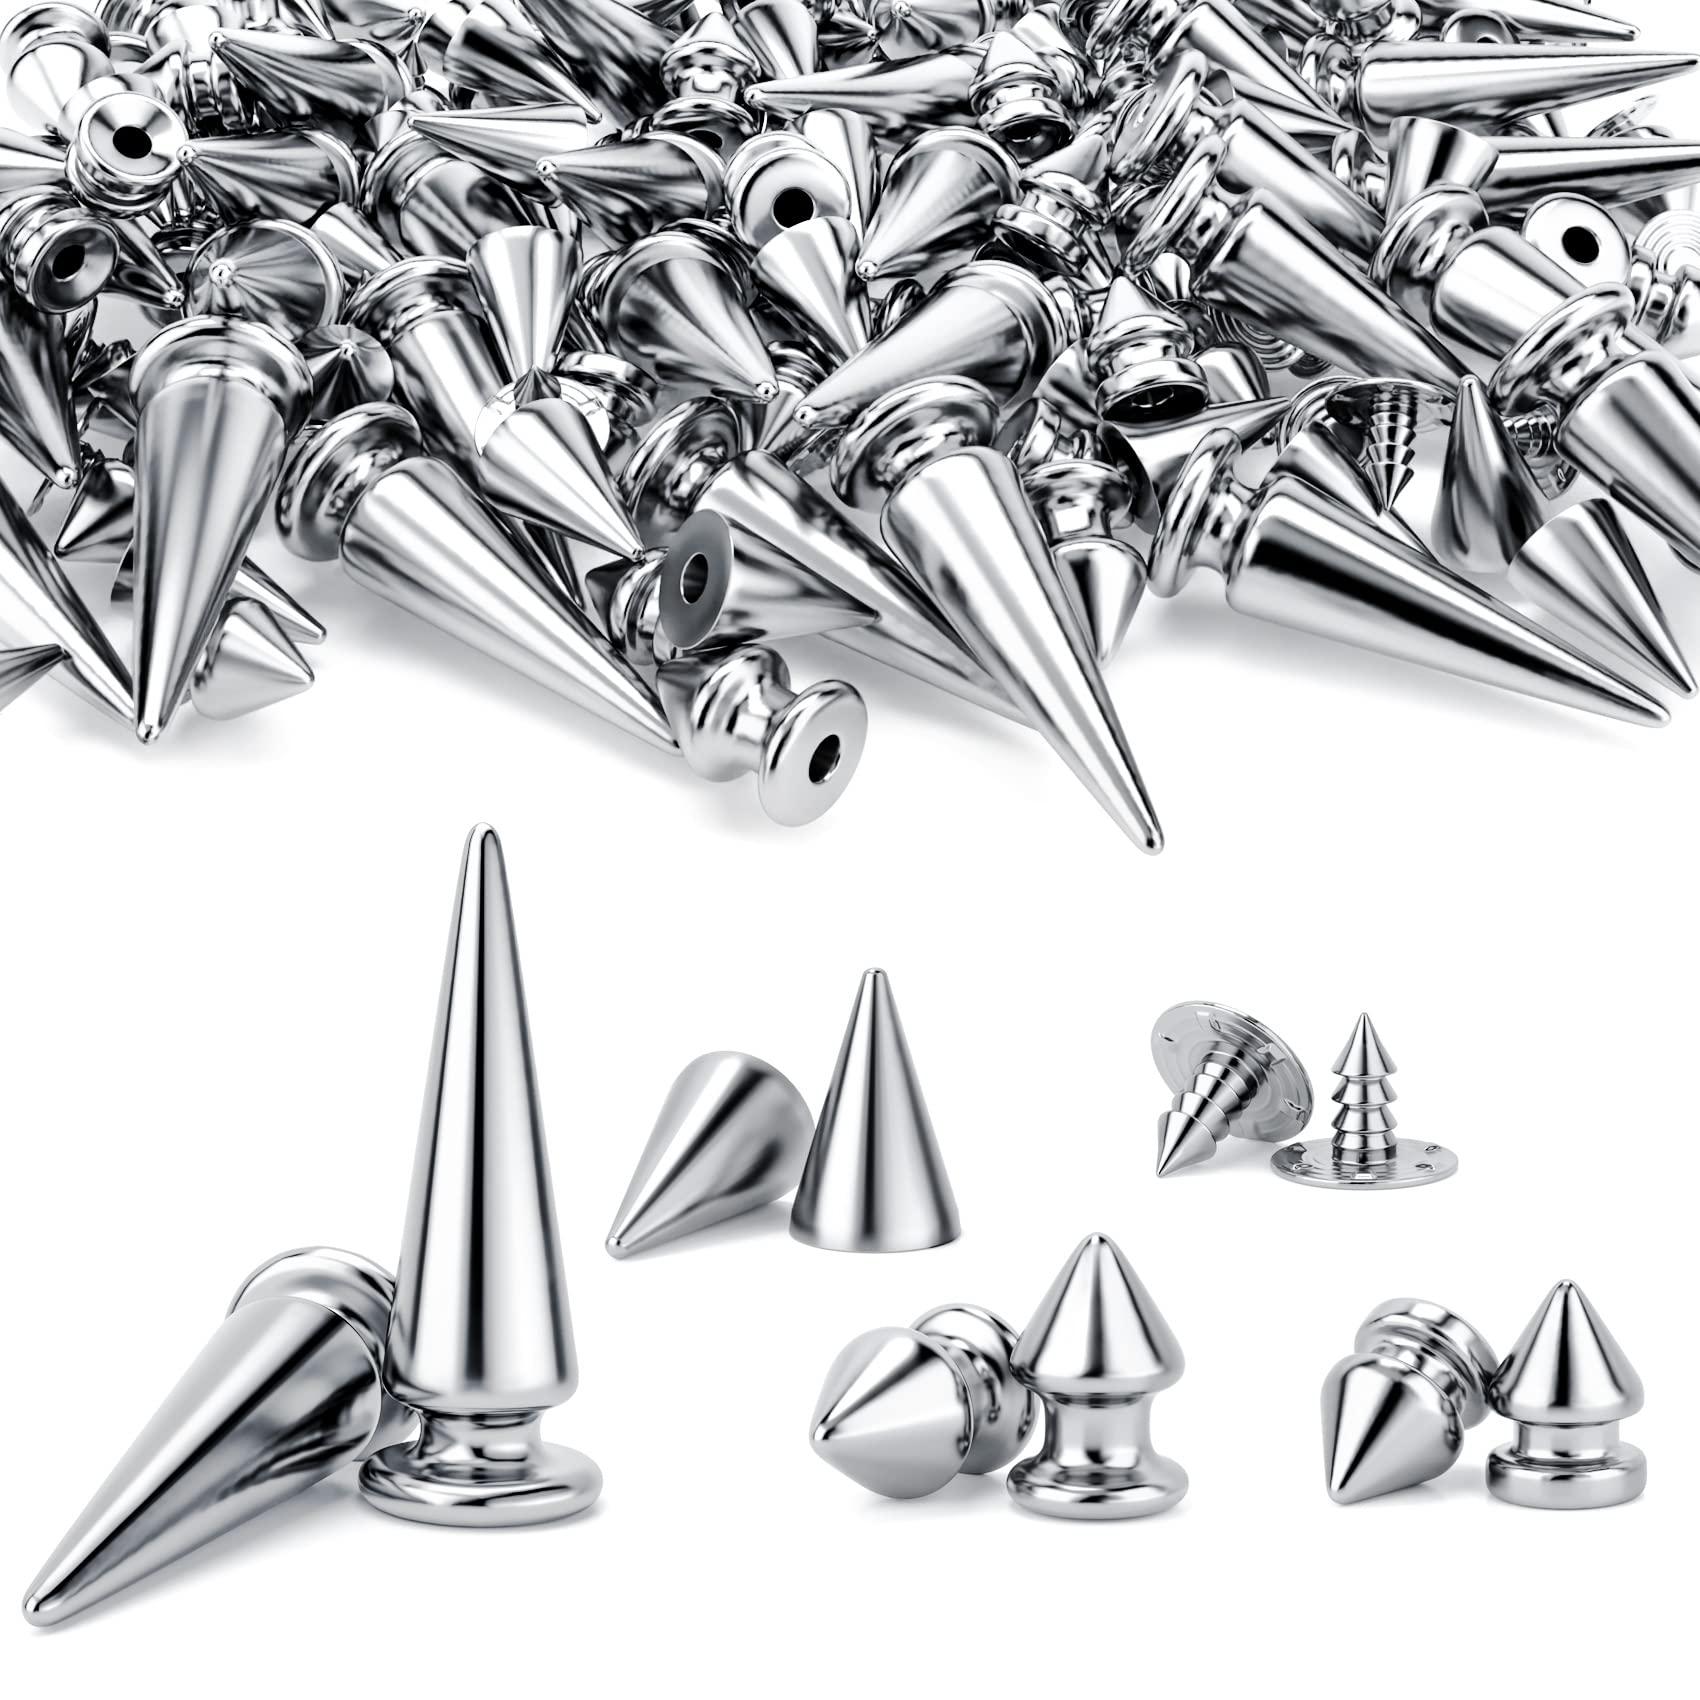 OIIKI 500PCS Silver ABS Bullet Spike Cone Studs Assorted Sizes